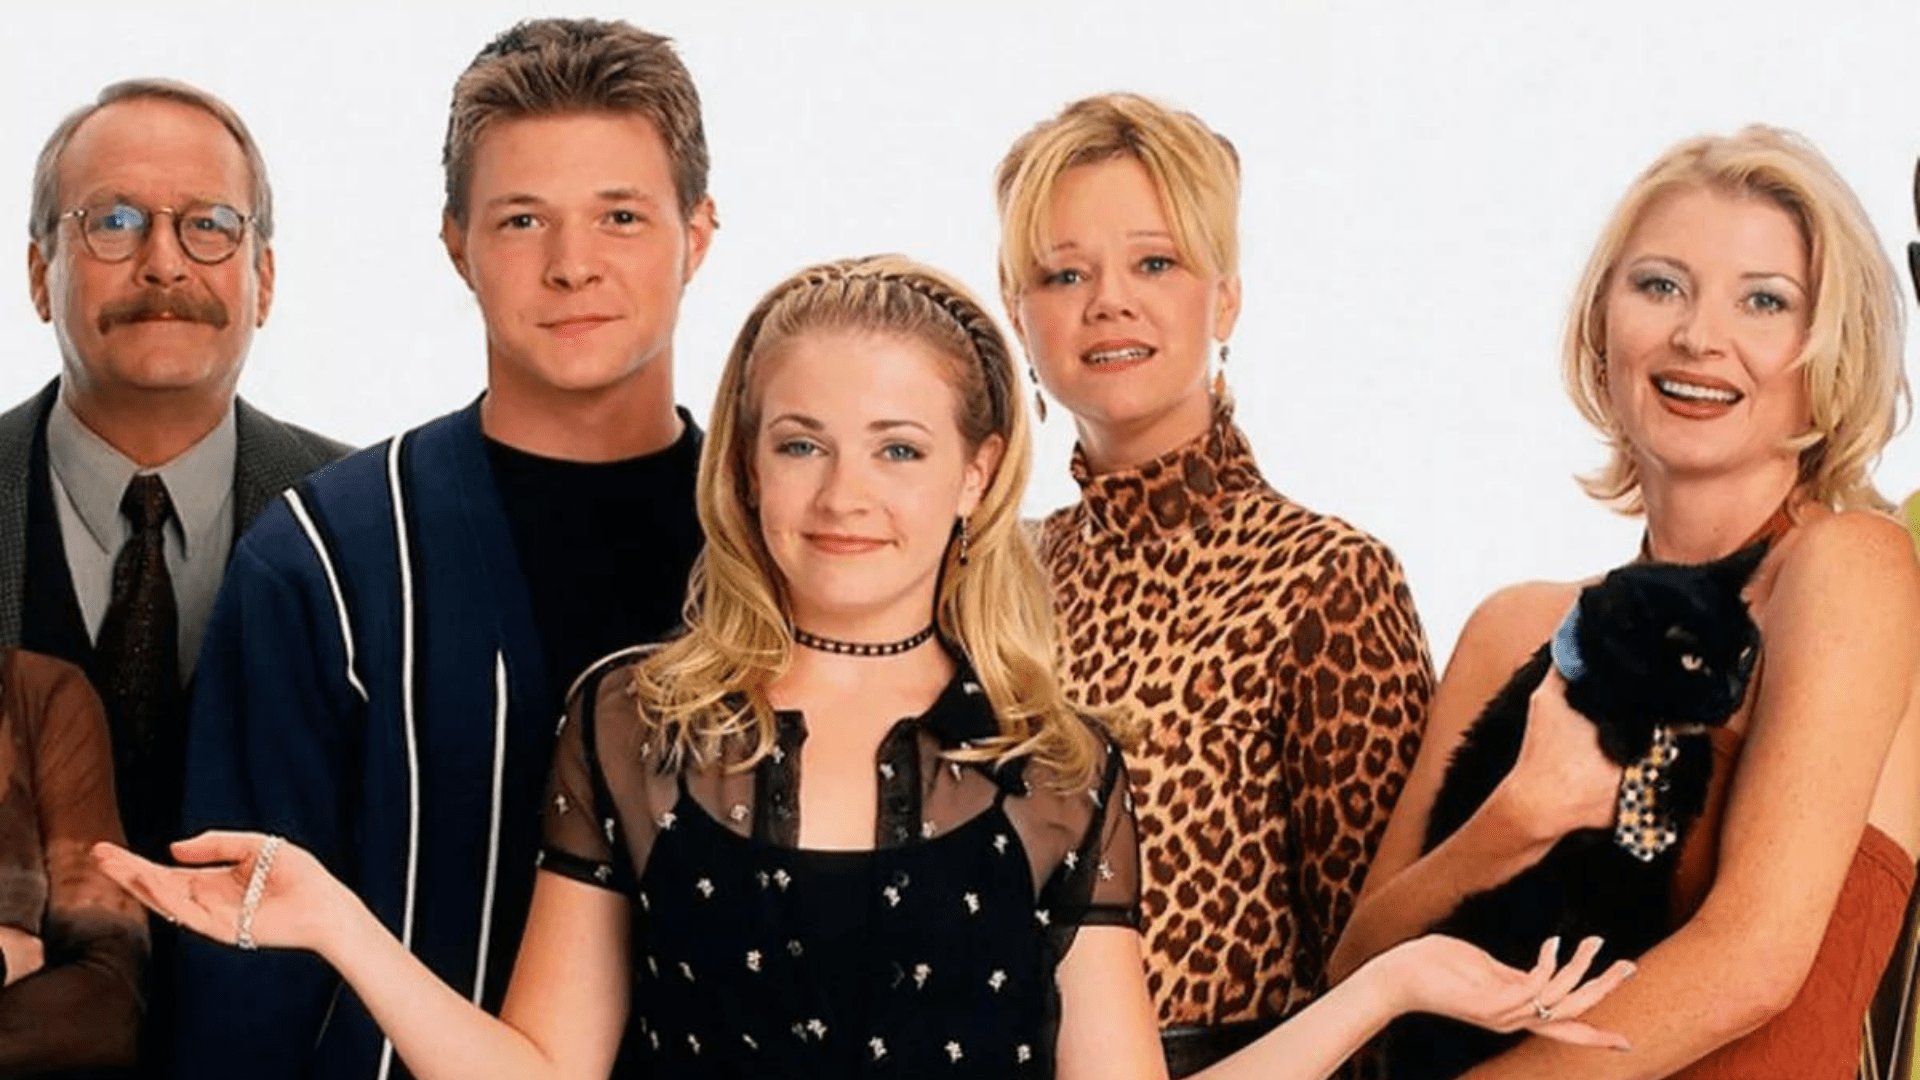 82 Sabrina The Teenage Witch Facts That Every 90s Kid Should Know - Sabrina The Teenage Witch Facts